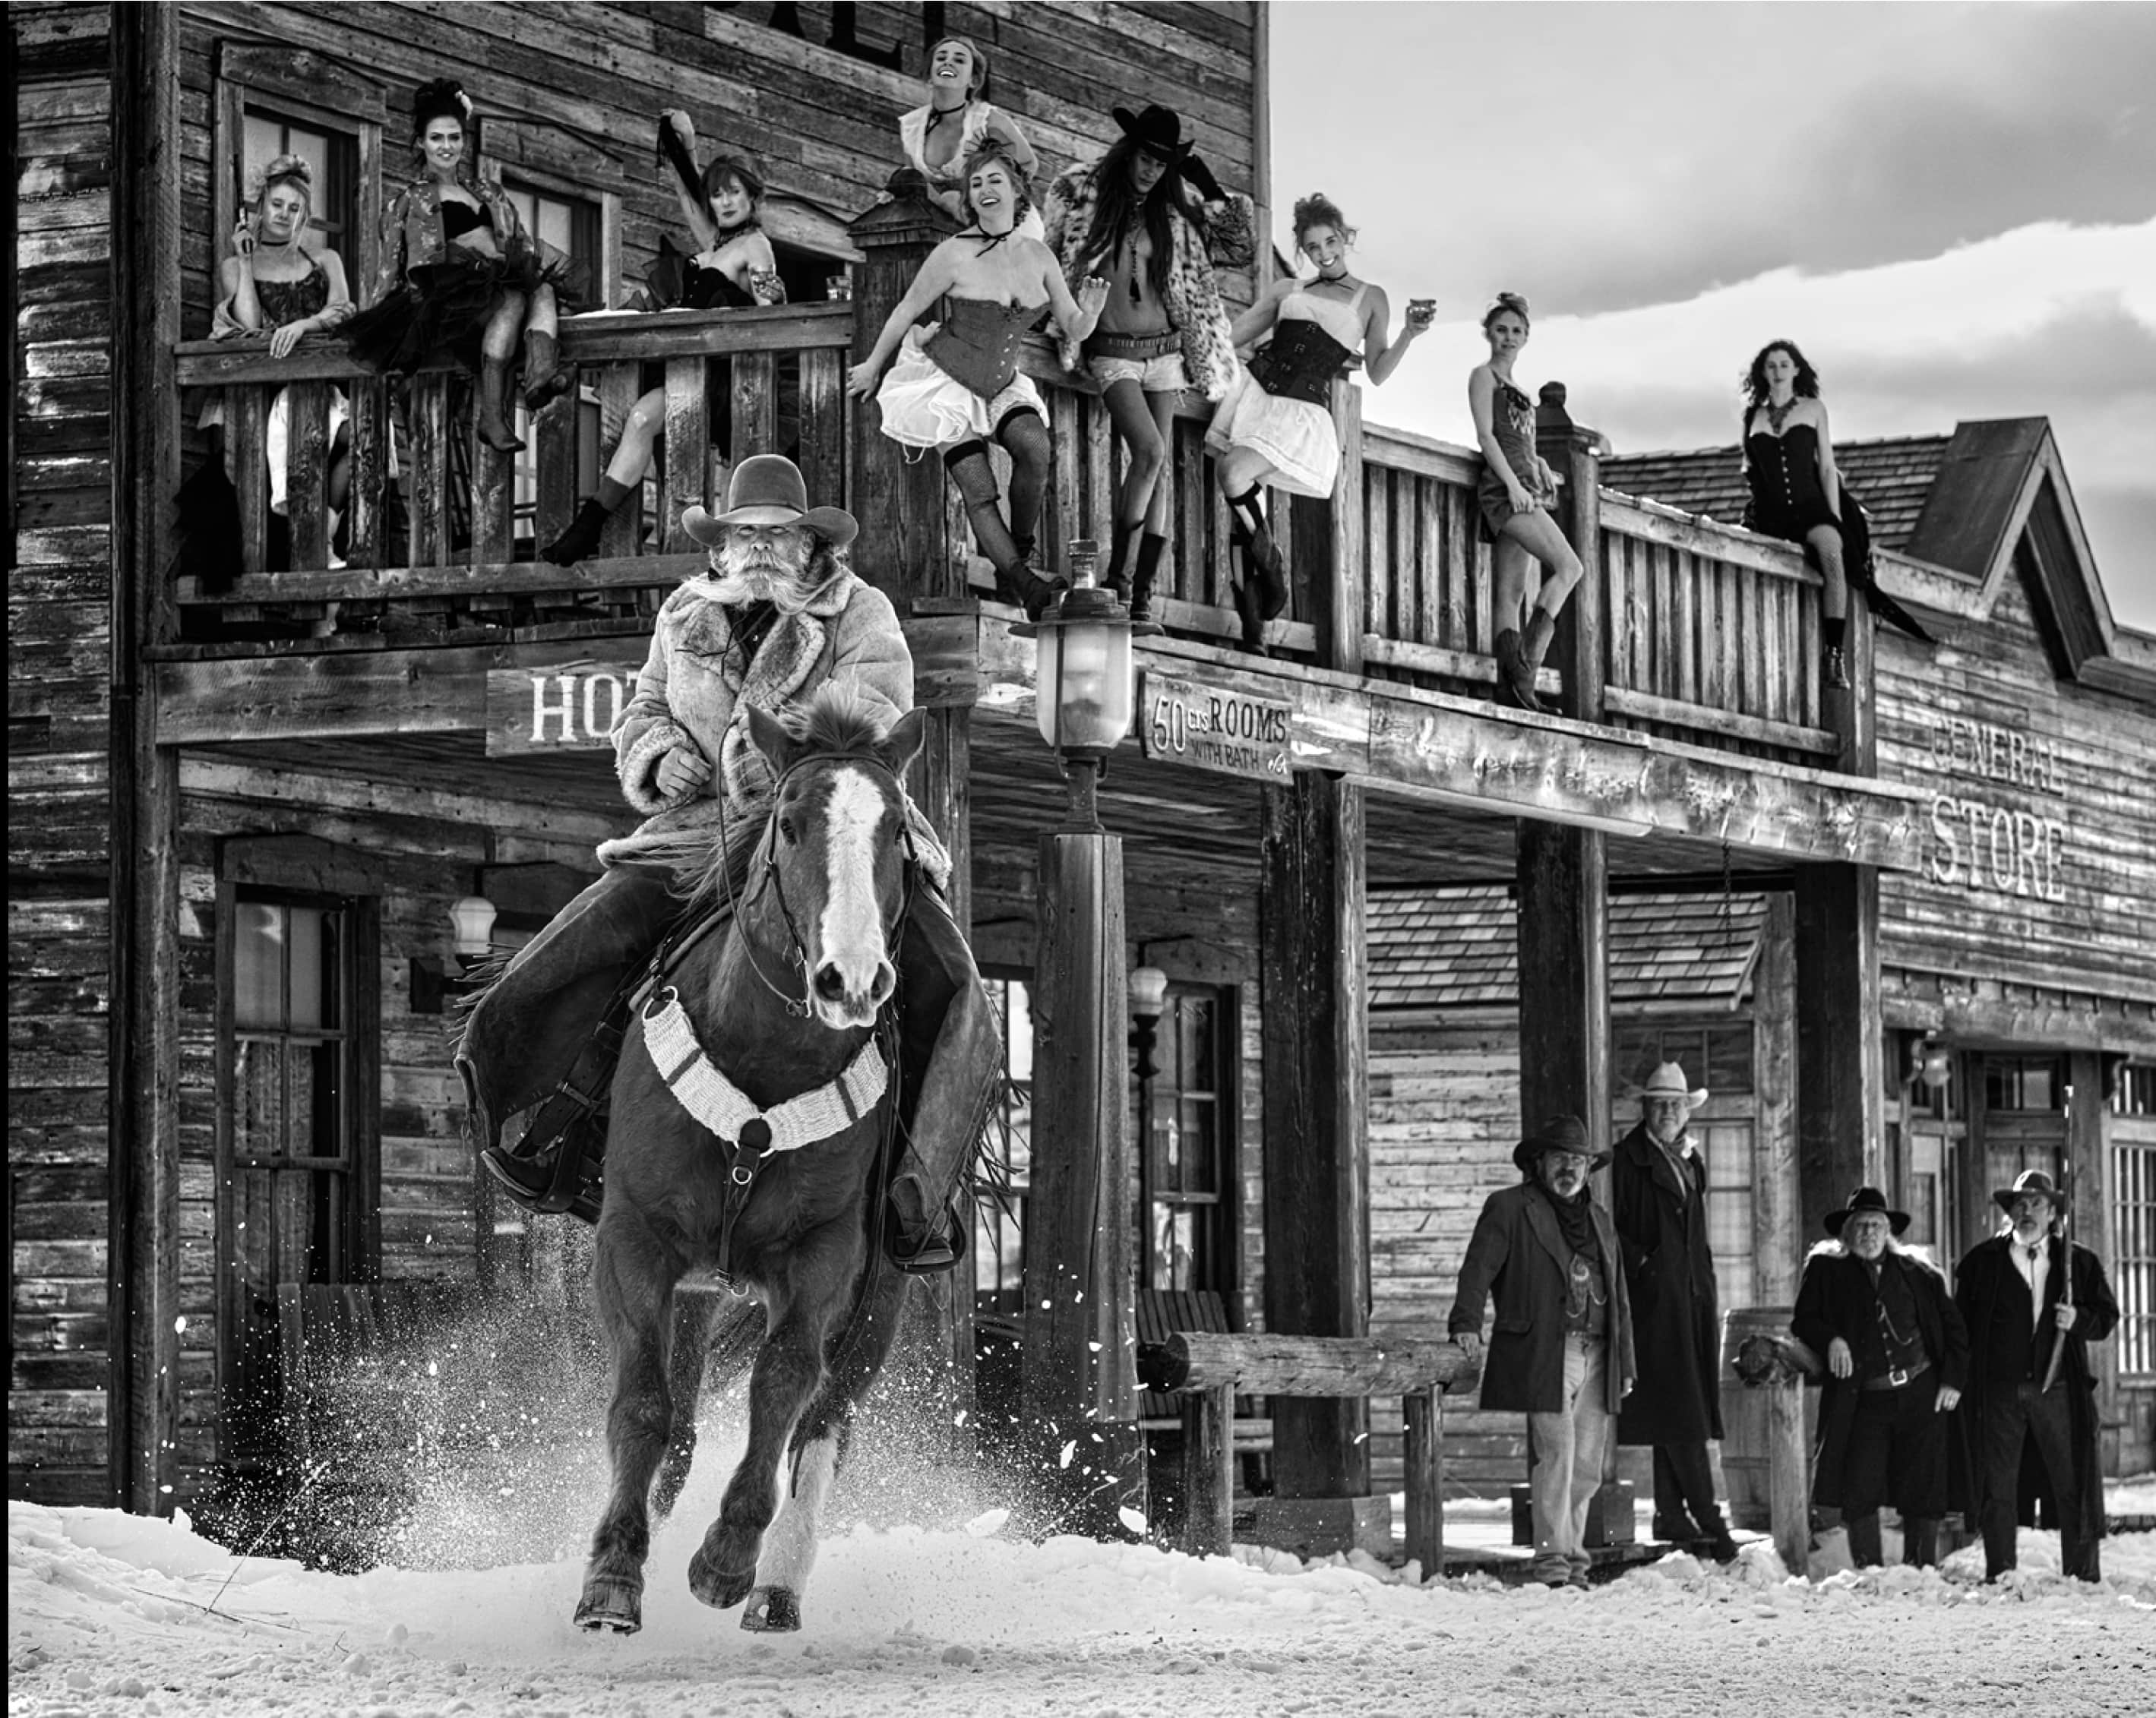 David Yarrow Mamas Don’t Let Your Babies Grow Up To Be Cowboys Archival Pigment Print